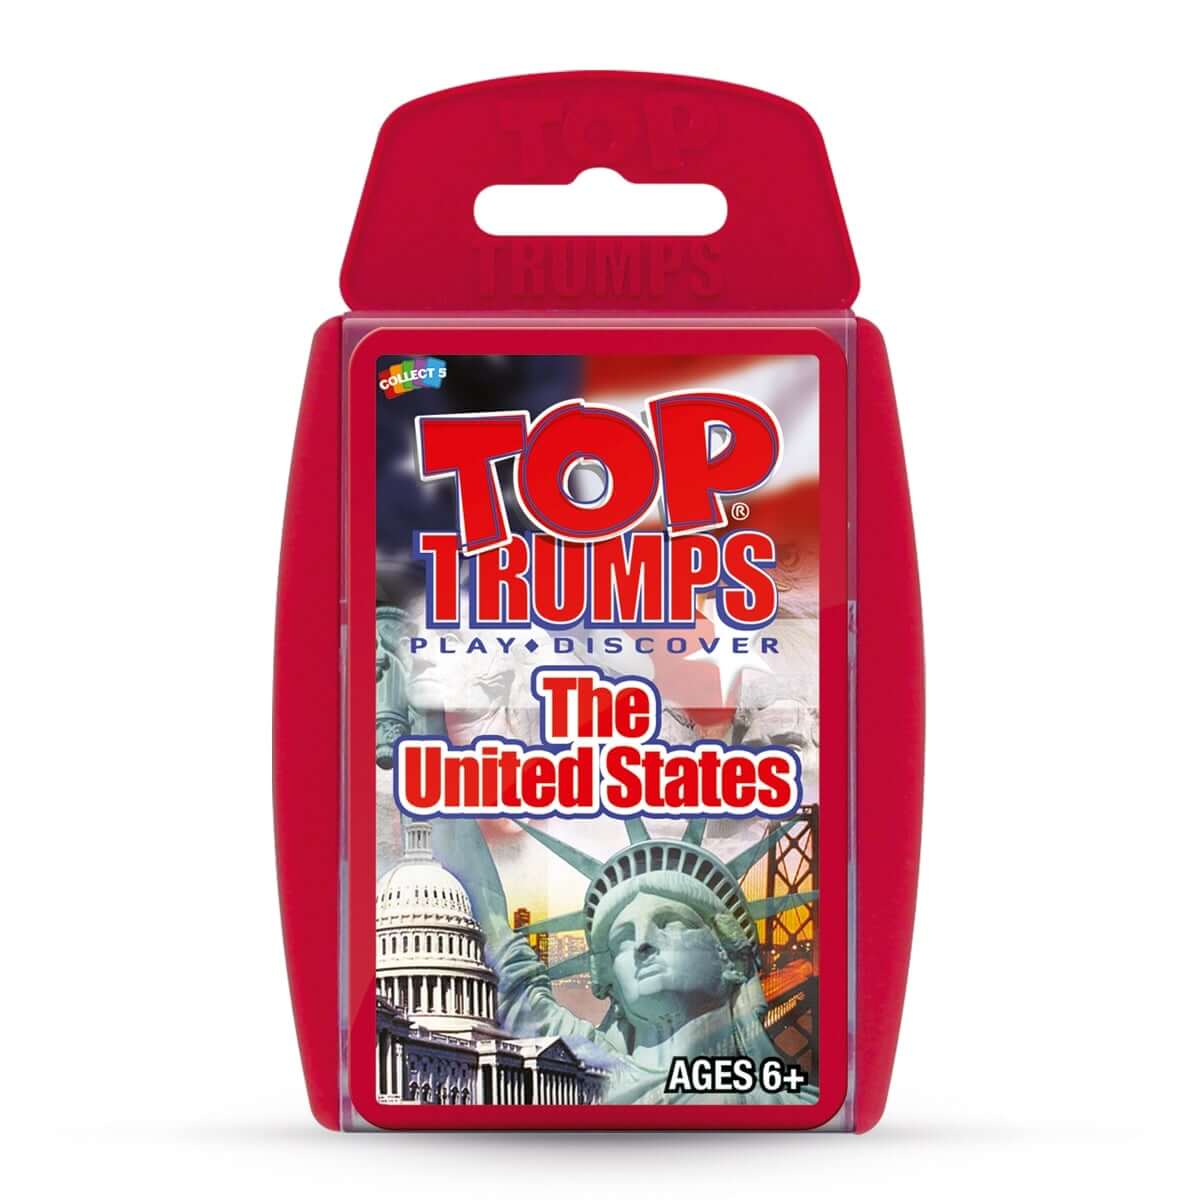 The United States Top Trumps Card Game